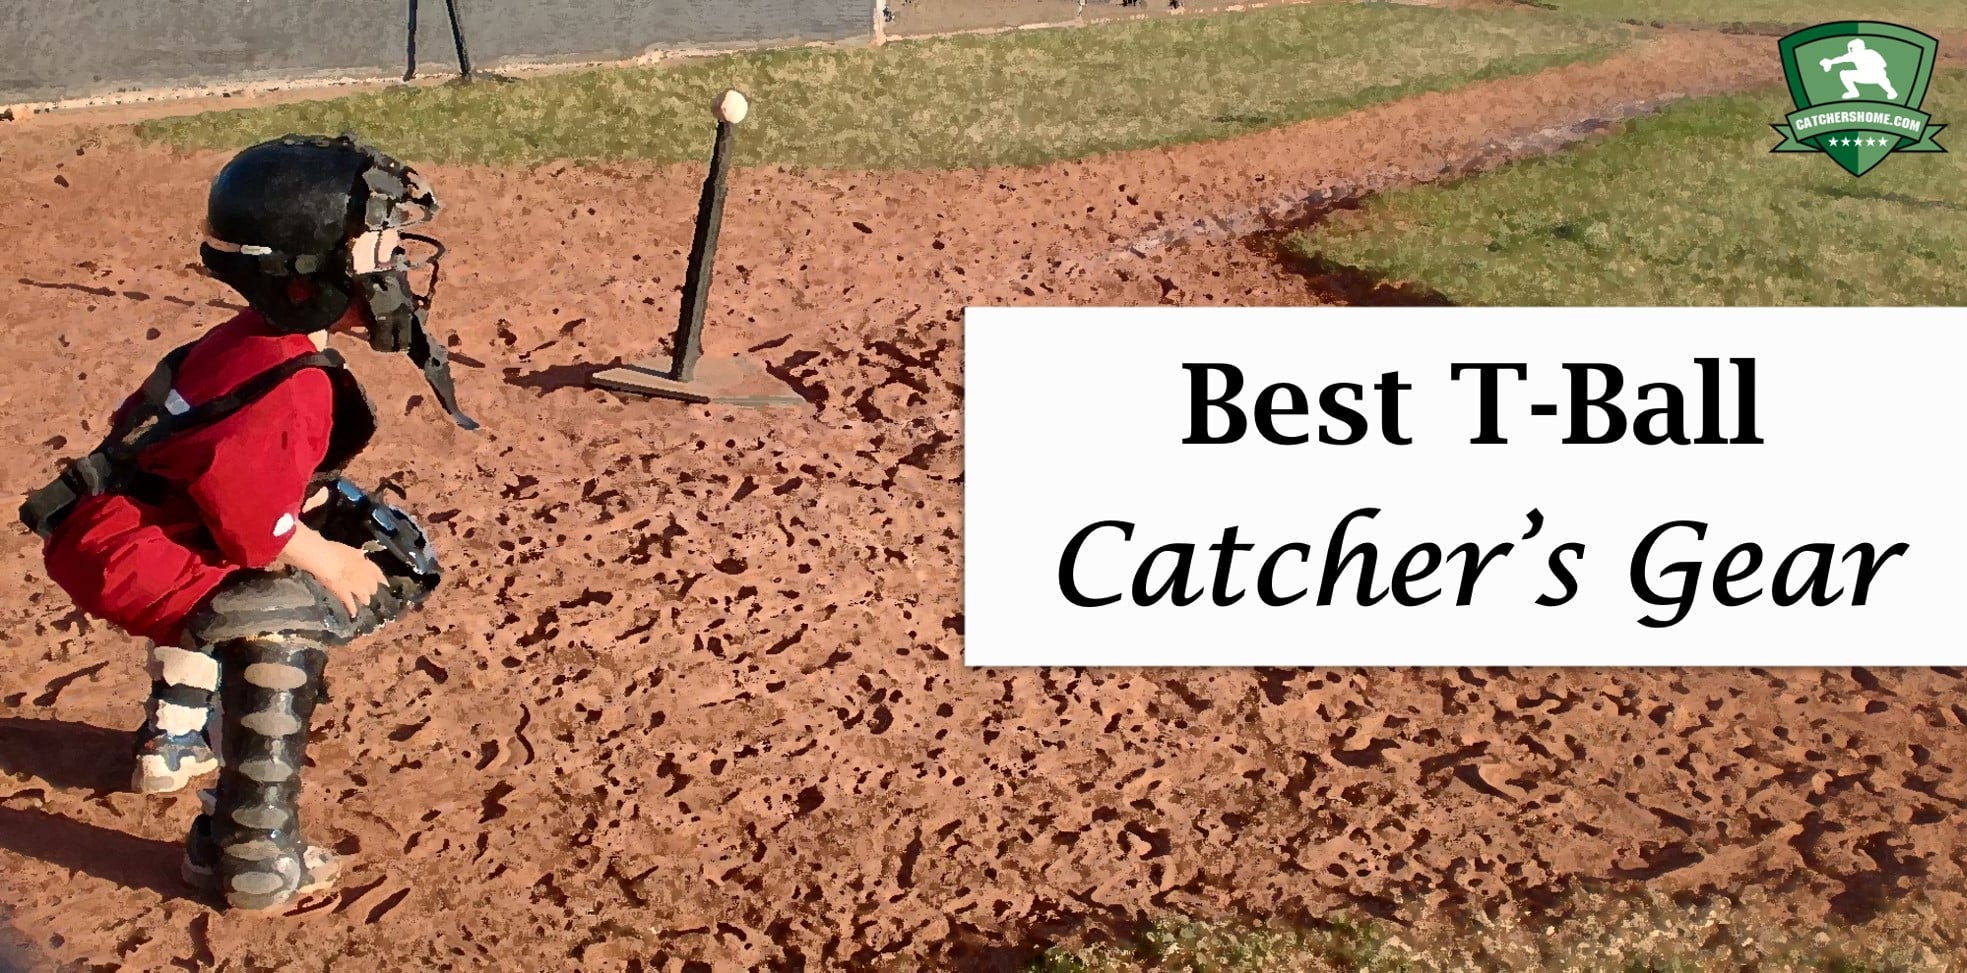 Best T-Ball Catchers Gear: Our Top Picks [for the 2022 Season]